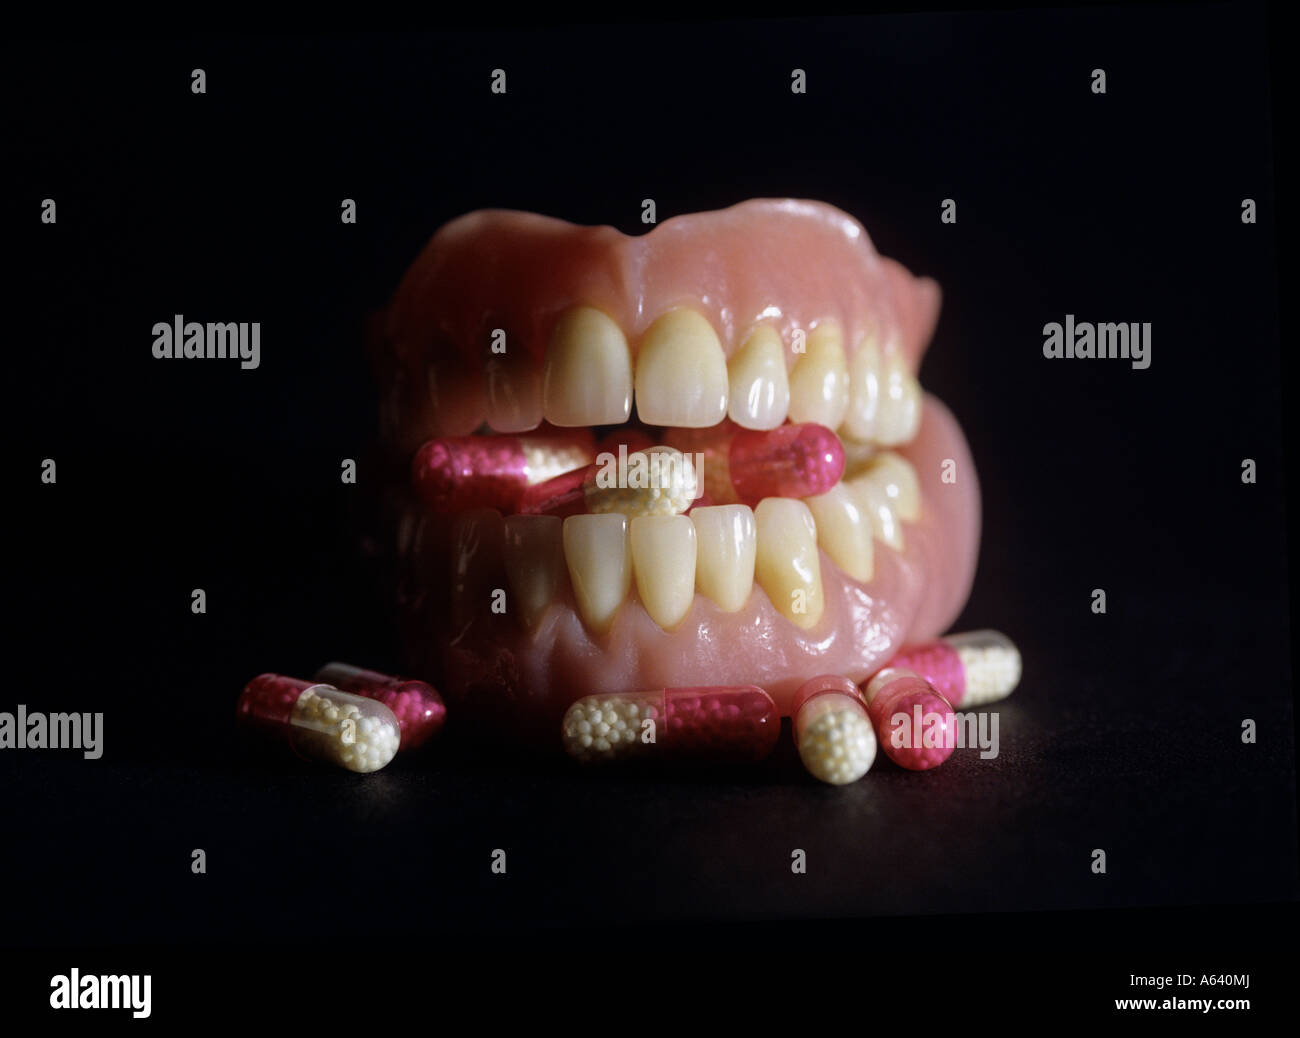 teeth stuffing capsules symbolism for drug obsession Stock Photo